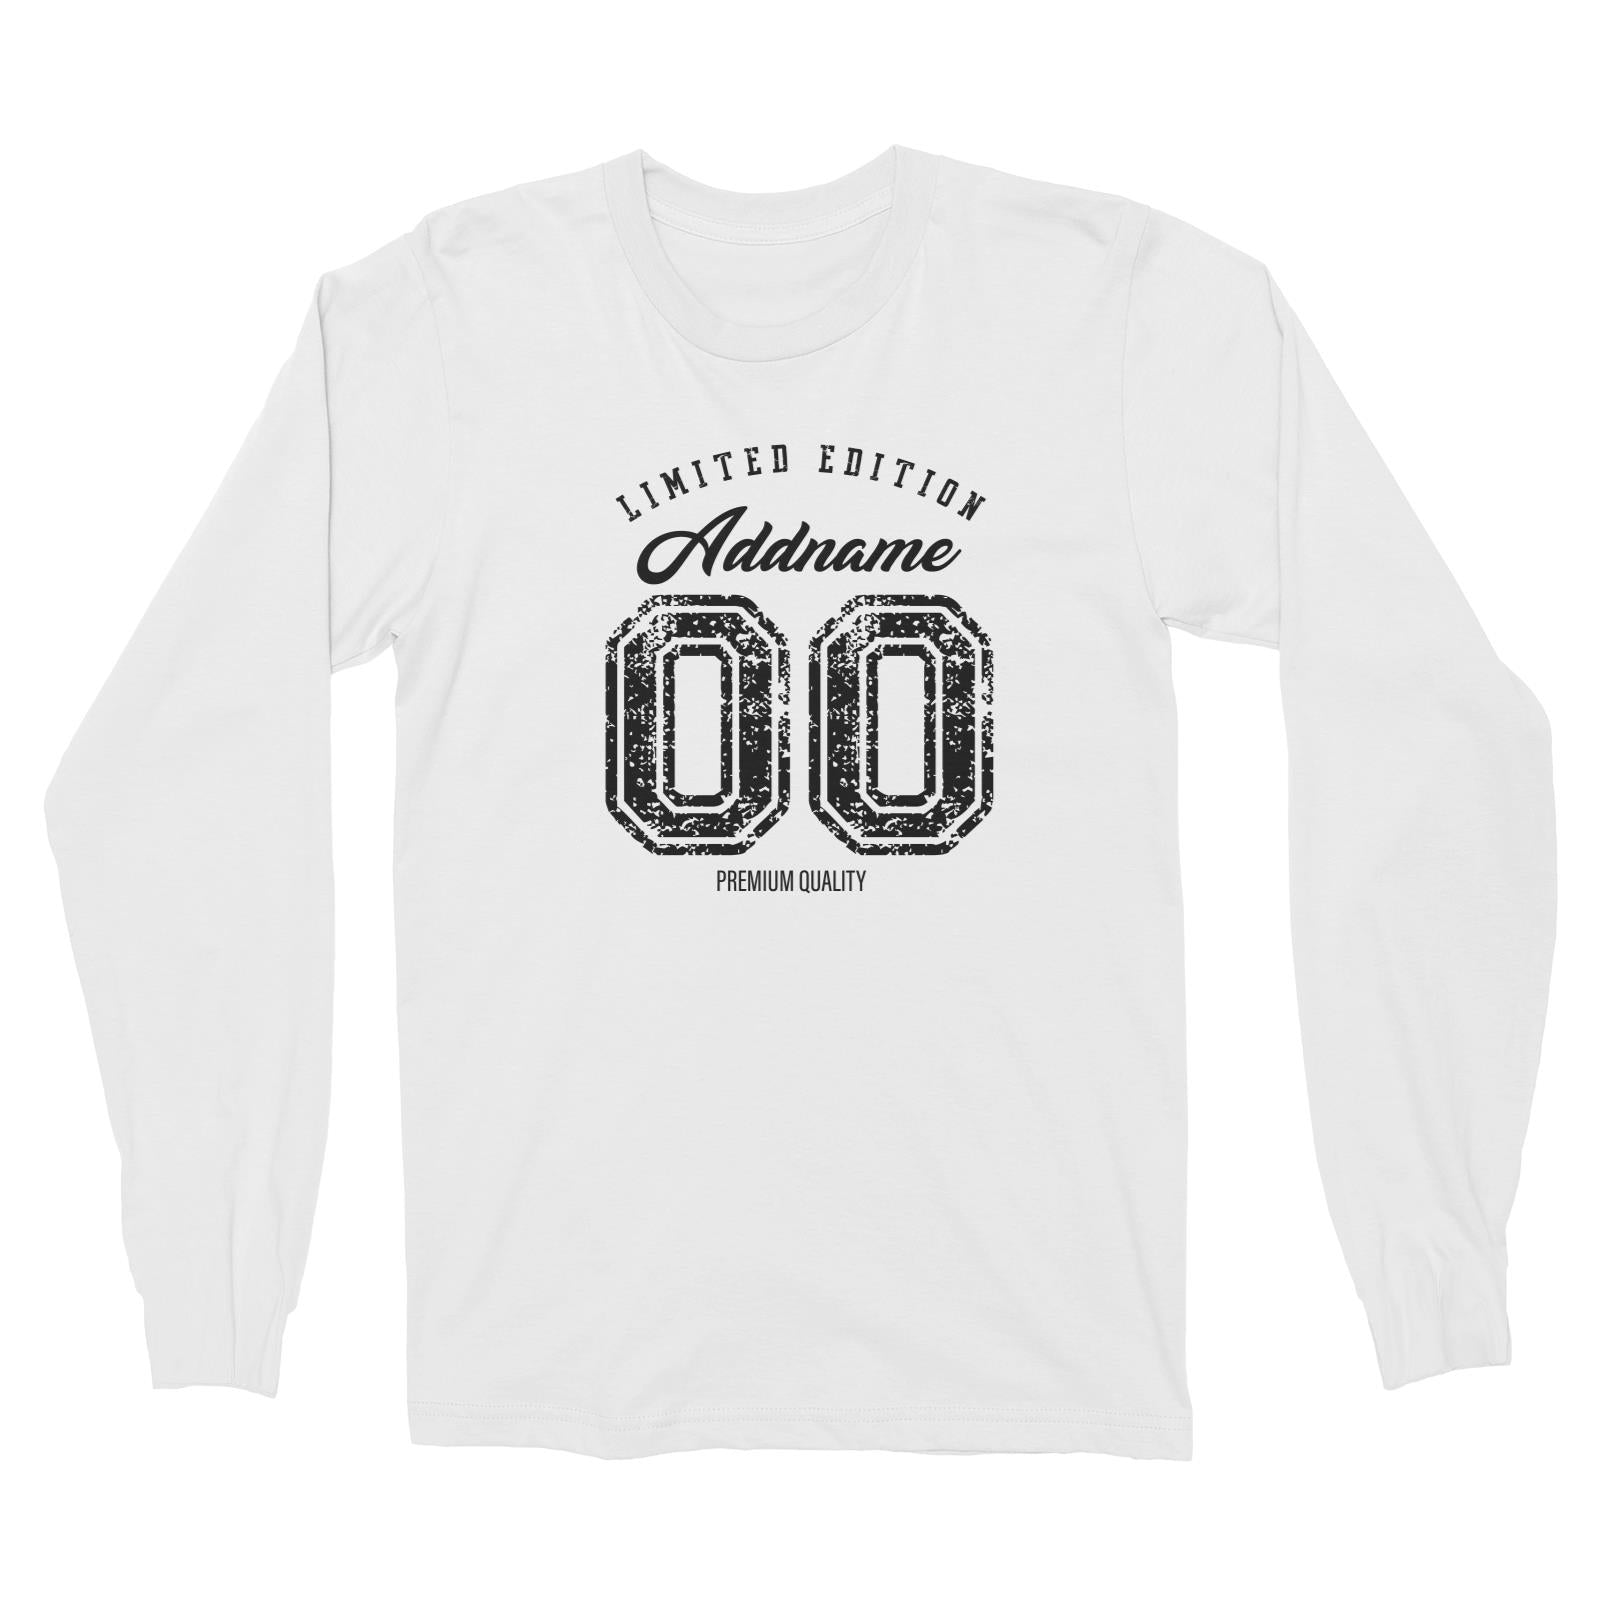 Limited Edition Premium Quality Personalizable with Name and Number Long Sleeve Unisex T-Shirt